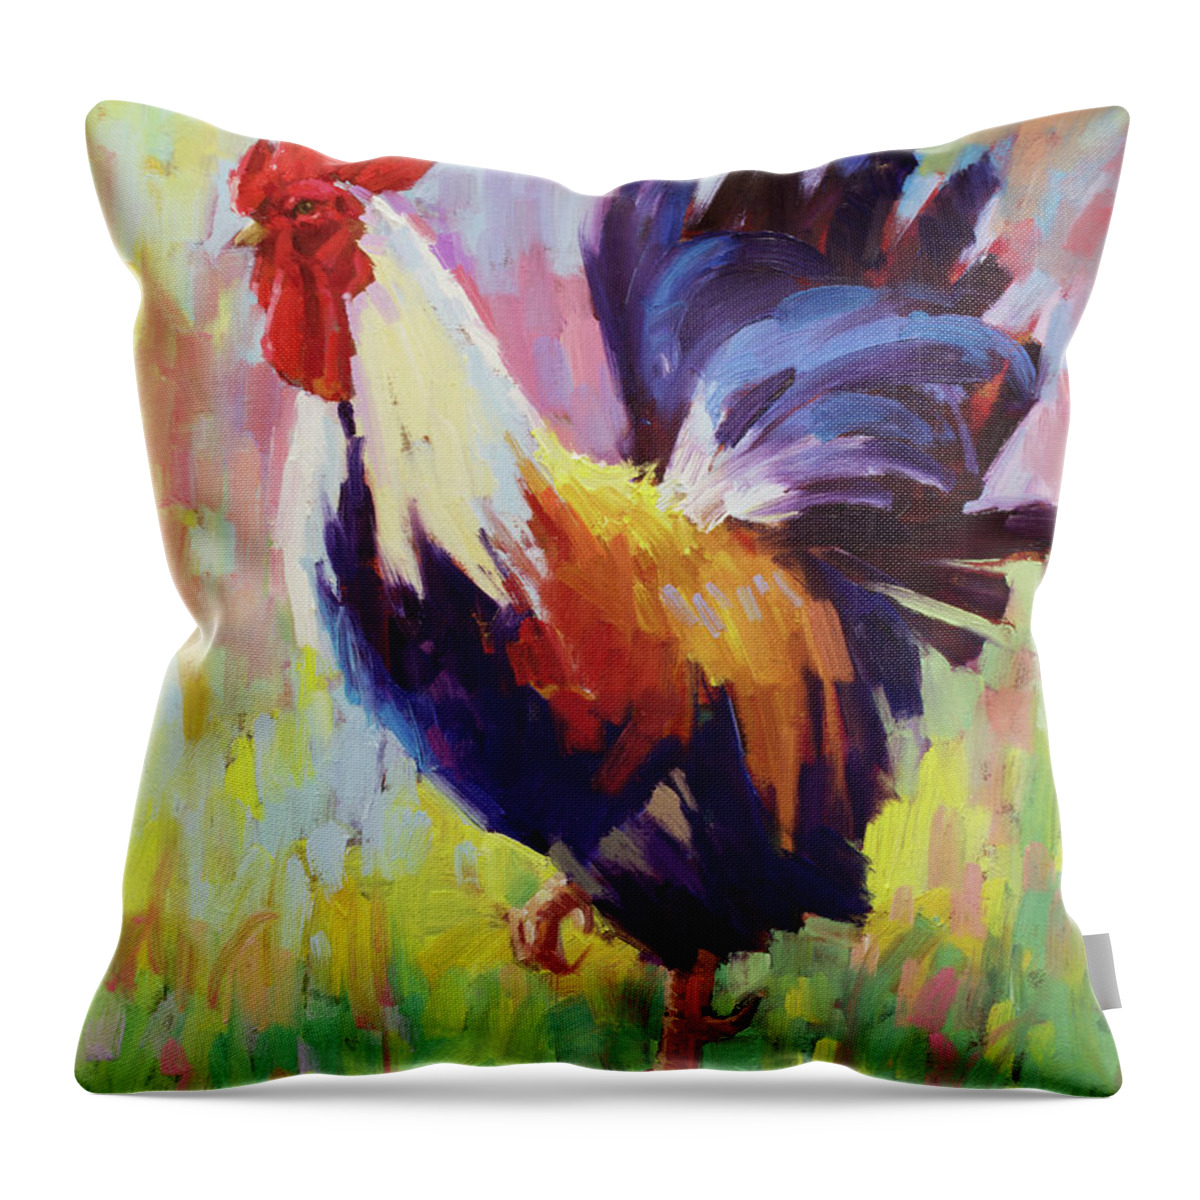 Cock Of The Walk Roosters Original Rooster Oil Painting Gary Modern impressionism paintings Impressionistic Rooster Oil Painting Original Oil Painting Impressionism Impressionist Techniques Impressionist Style painting oil on Canvas Chicken Nature Feathers Proudness Rooster The Proud Rooster Walks Through The Tall Grass In Search Hens Animal Styles Impressionism Rooster farm chicken Art Impressionist Landscape Richly Colored Textured Paint Stroke Unique  proud Rooster country Farm Throw Pillow featuring the painting Cock of the Walk by Gary Kim